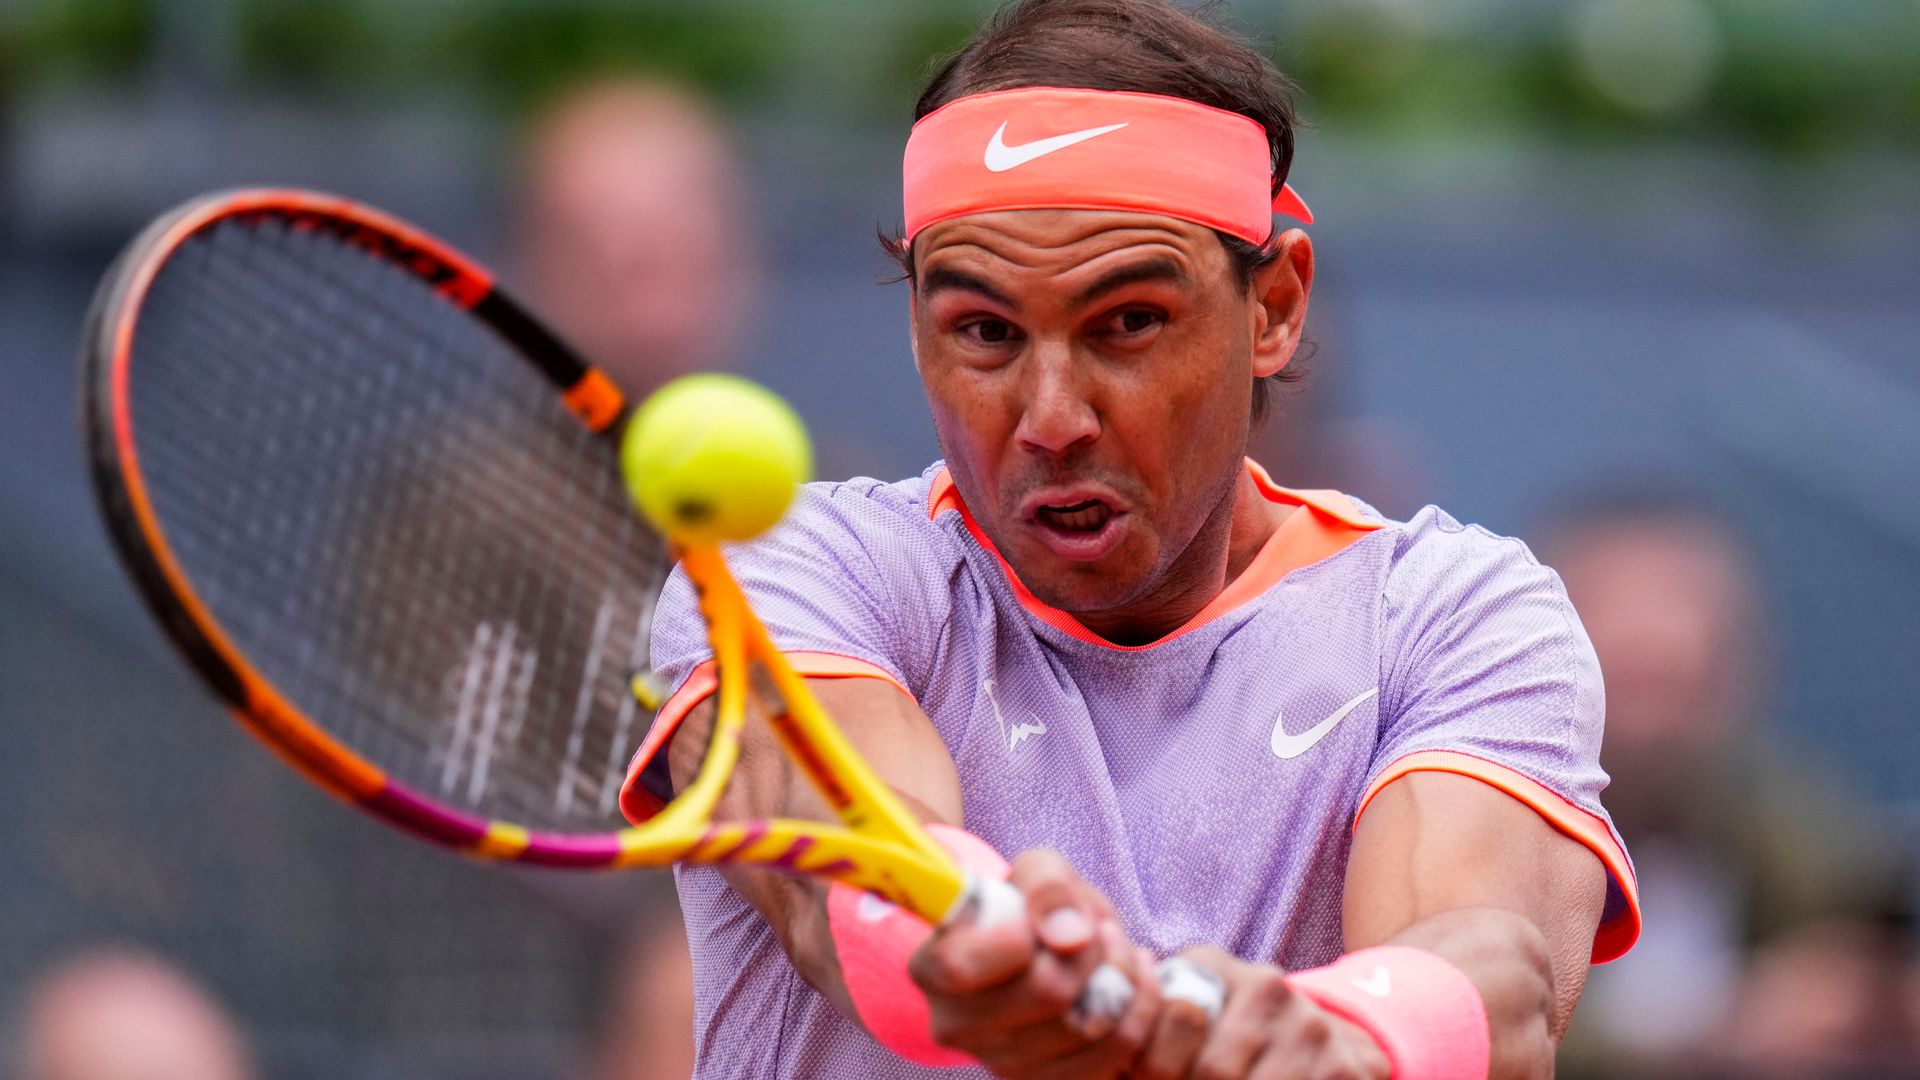 Nadal and Alcaraz in Tuesday Madrid Open action, live on Sky